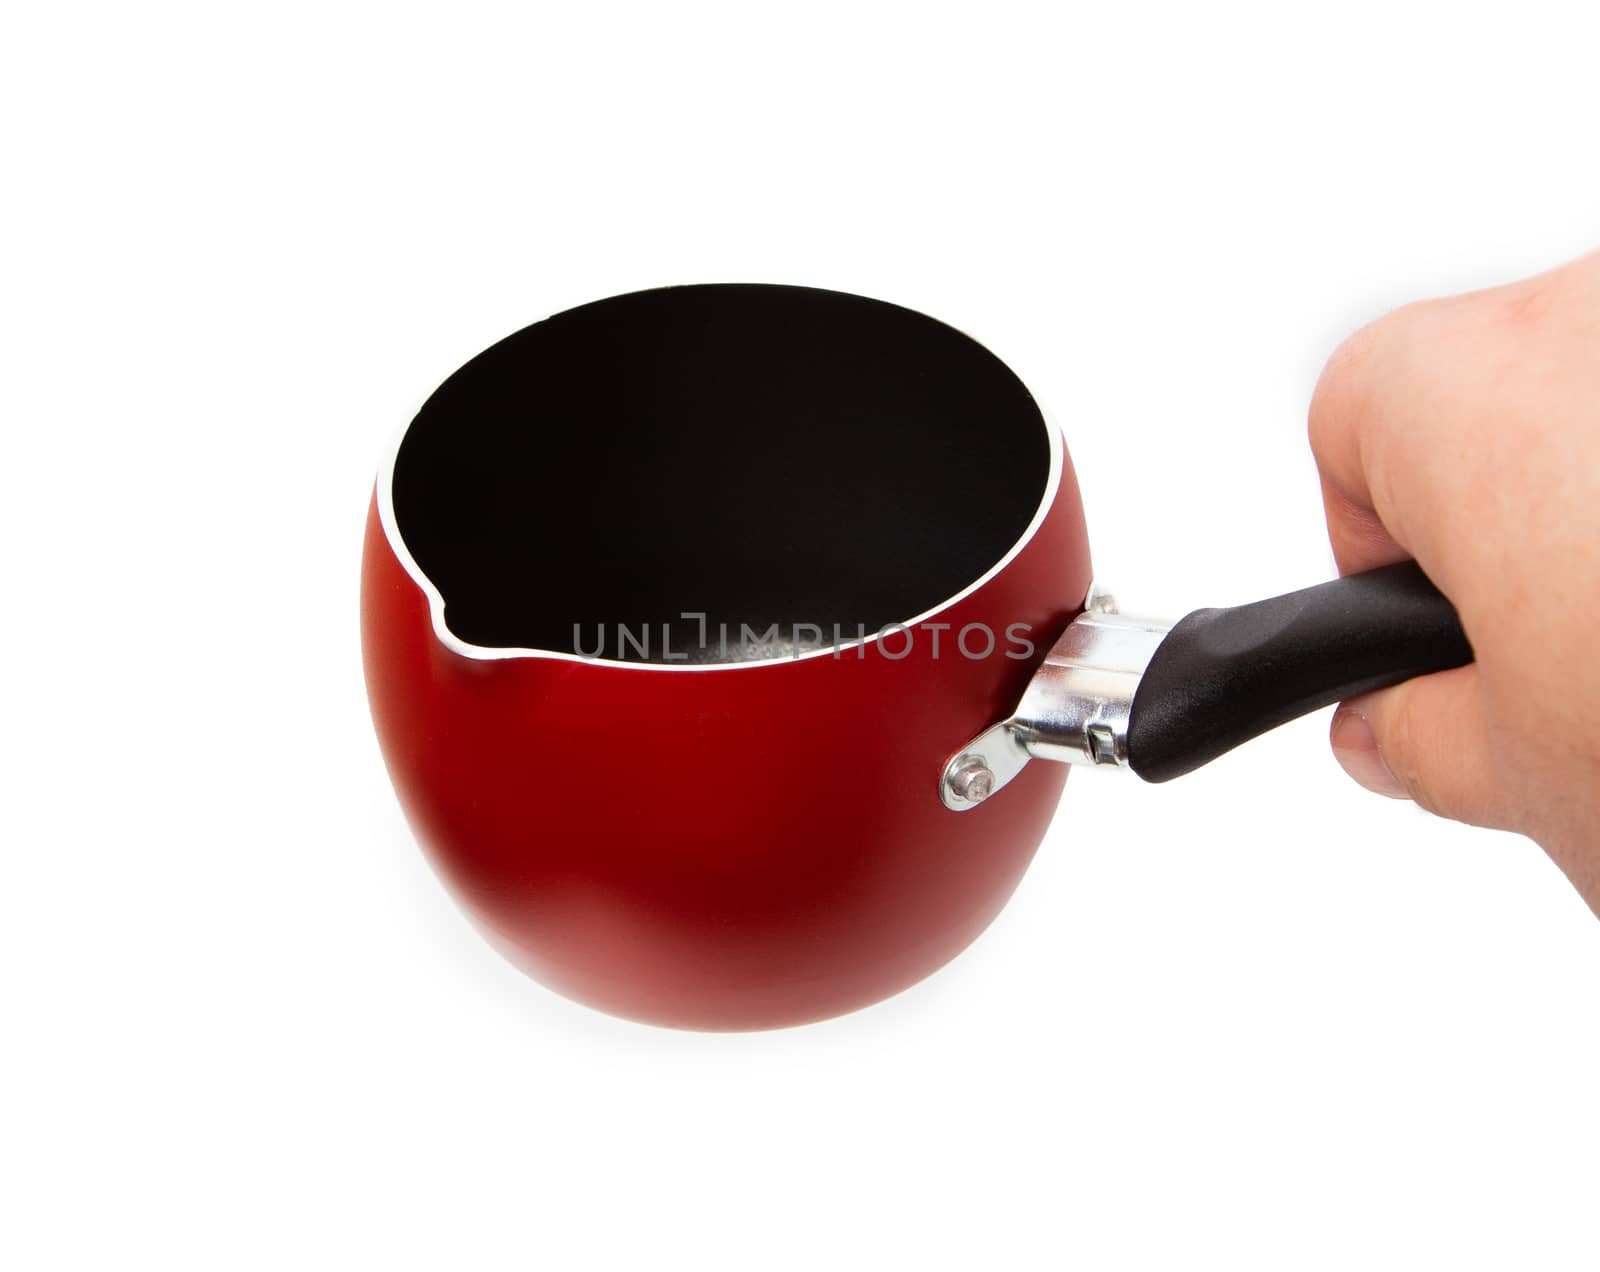 Men hand hold empty red stewpot. Close up isolated on white background. Kitchen utensils concept.